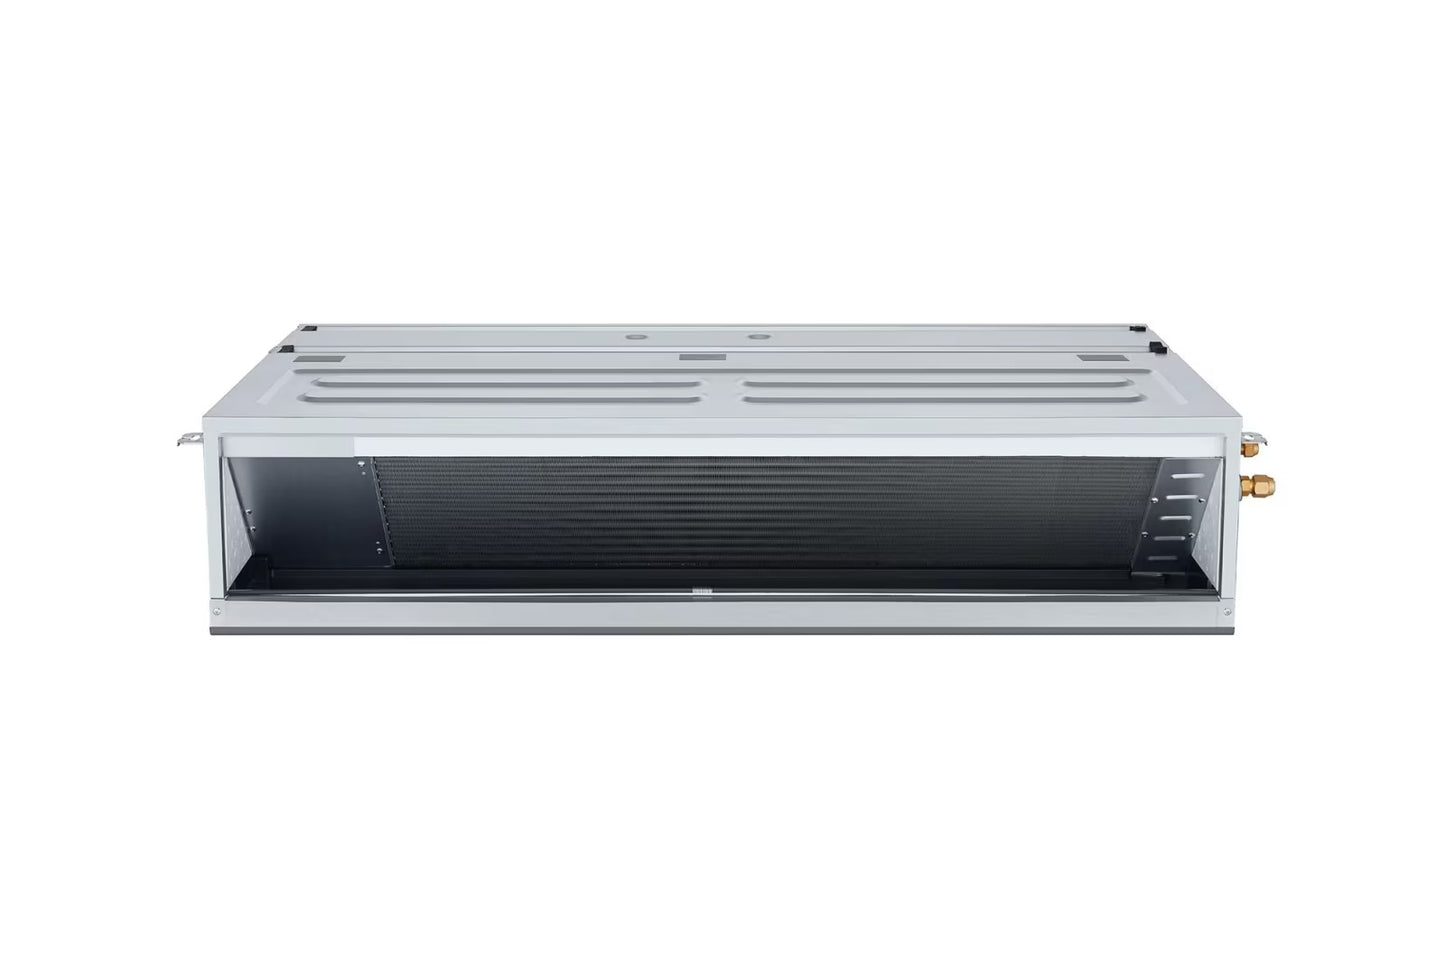 LG Ceiling Concealed Duct INV Unit 4.5KW with Mid Static and E.S.P. Control for Multiple Rooms - ARNU15GM1A4